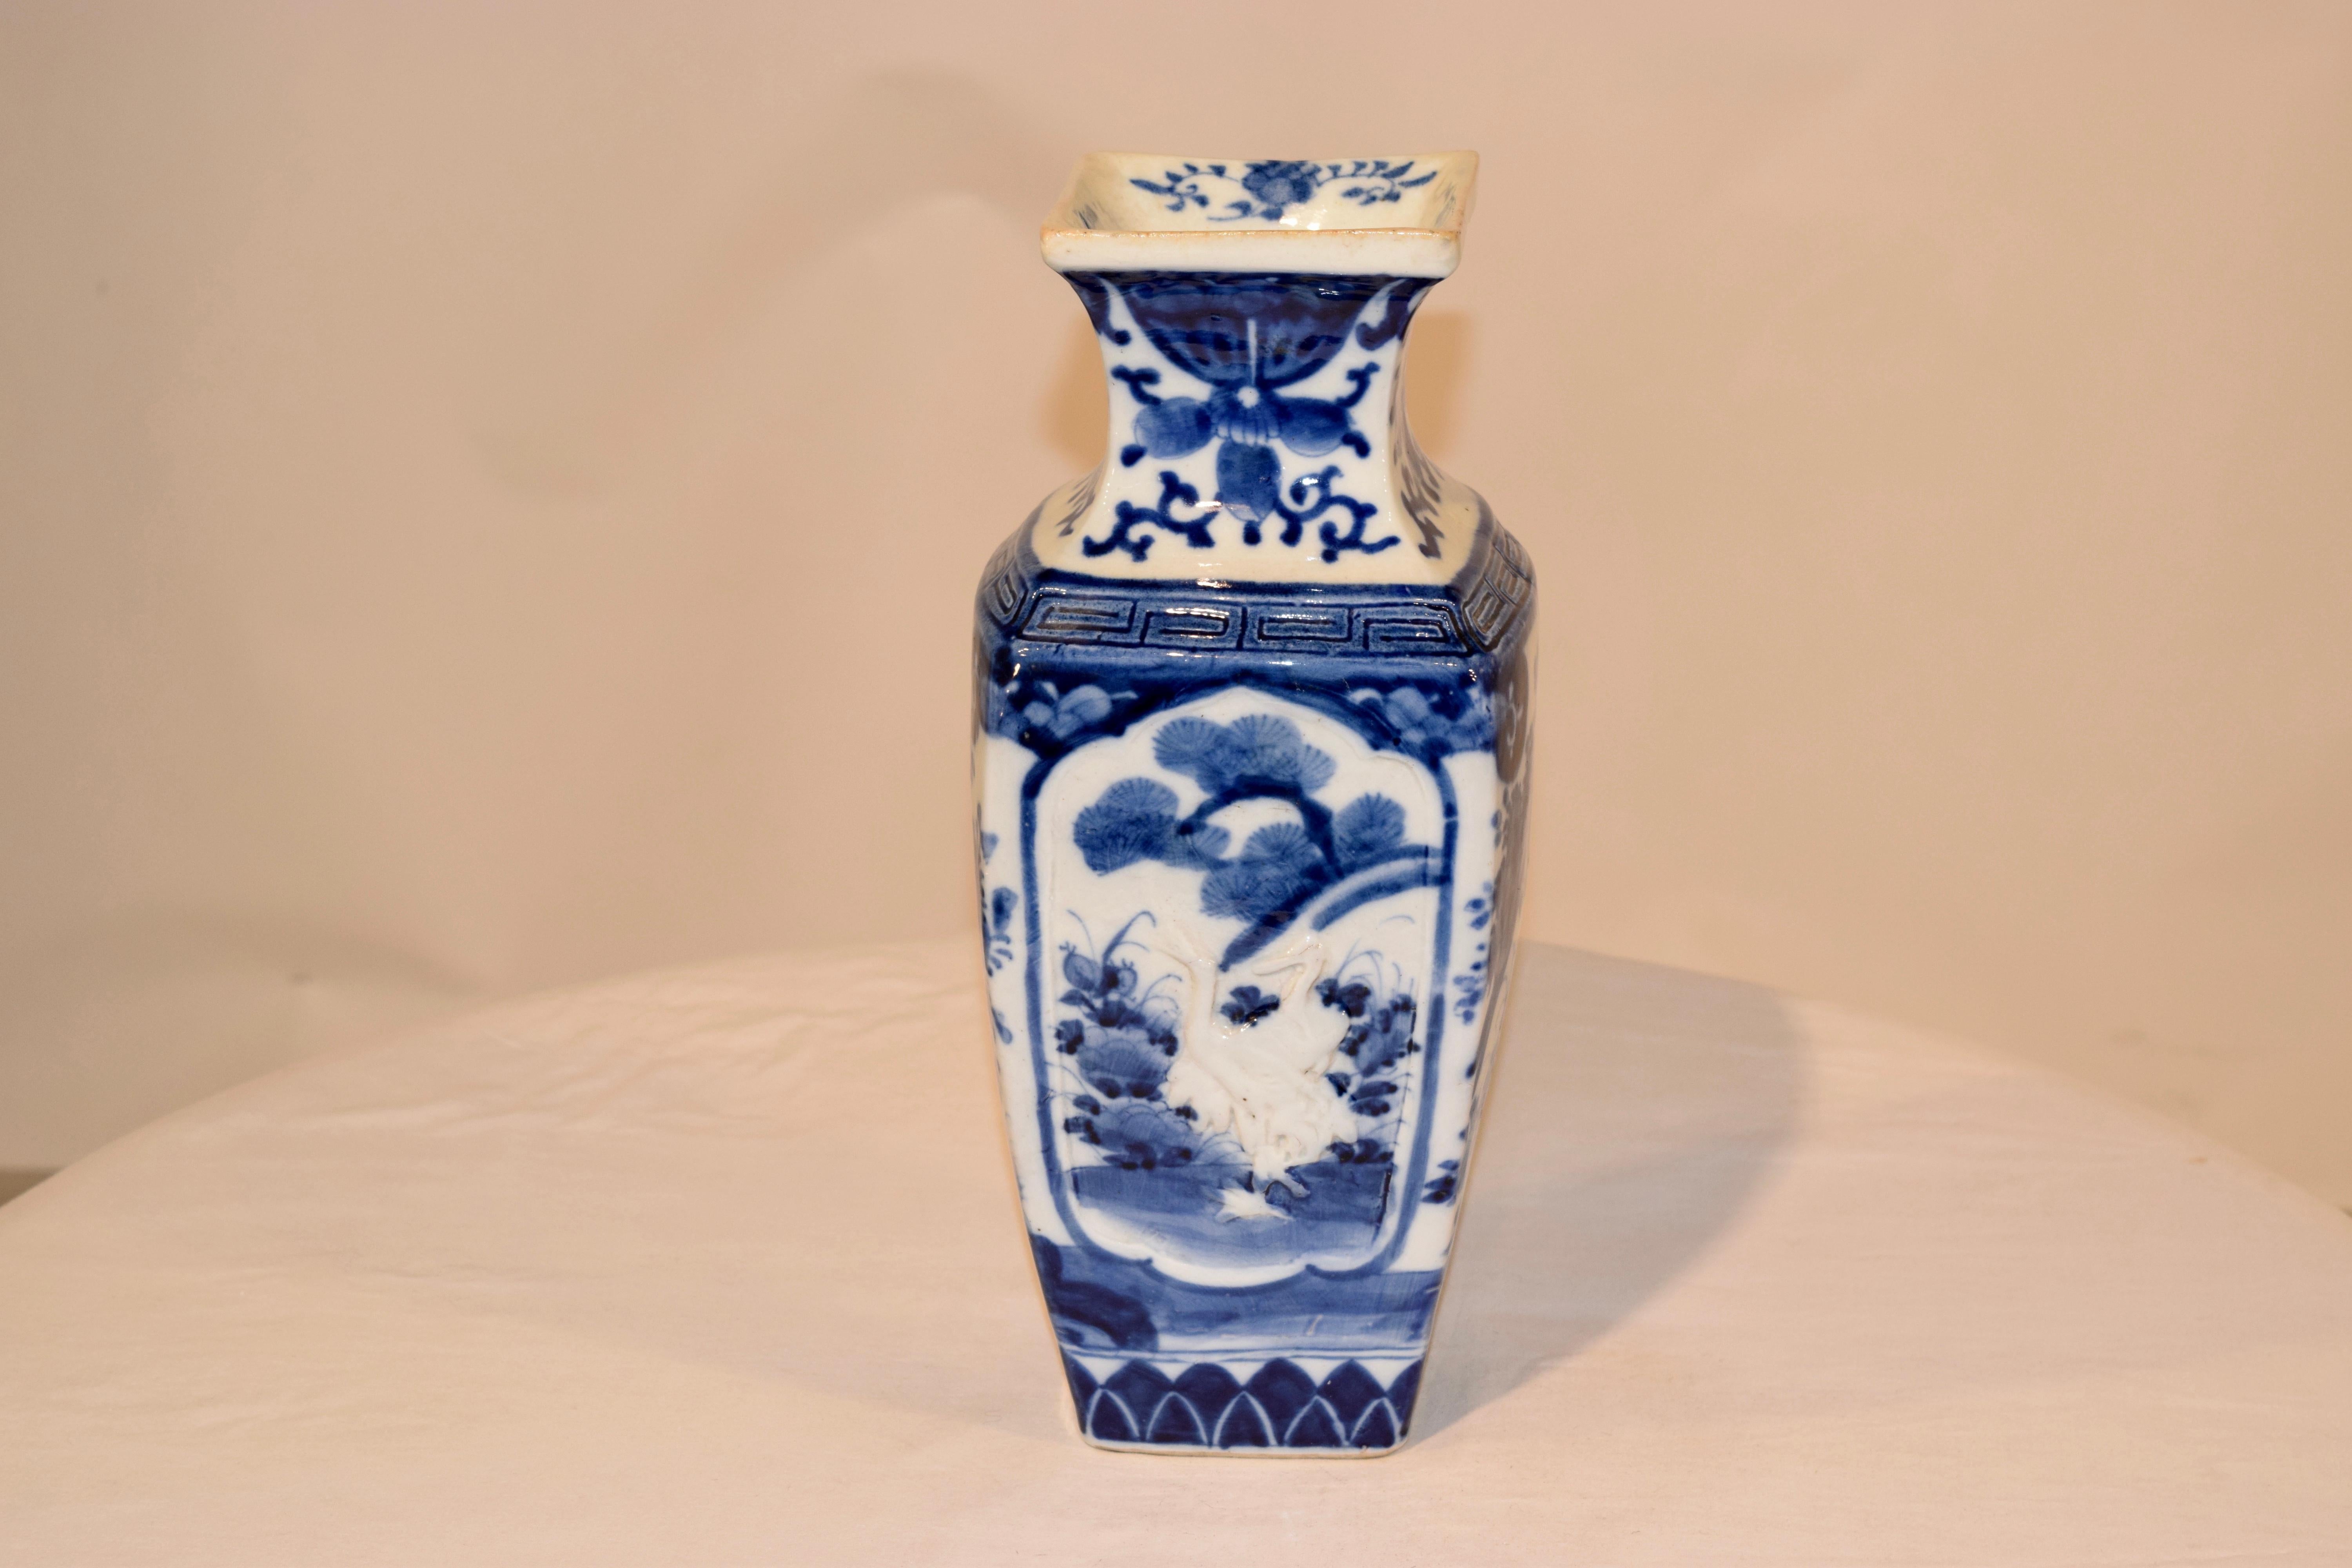 19th century Chinese export vase in vibrant hues of blue with medallions on two sides framing garden scenes and two relieved white cranes. On the opposite sides are lovely hand painted scenes with birds perching on branches, surrounded by florals.